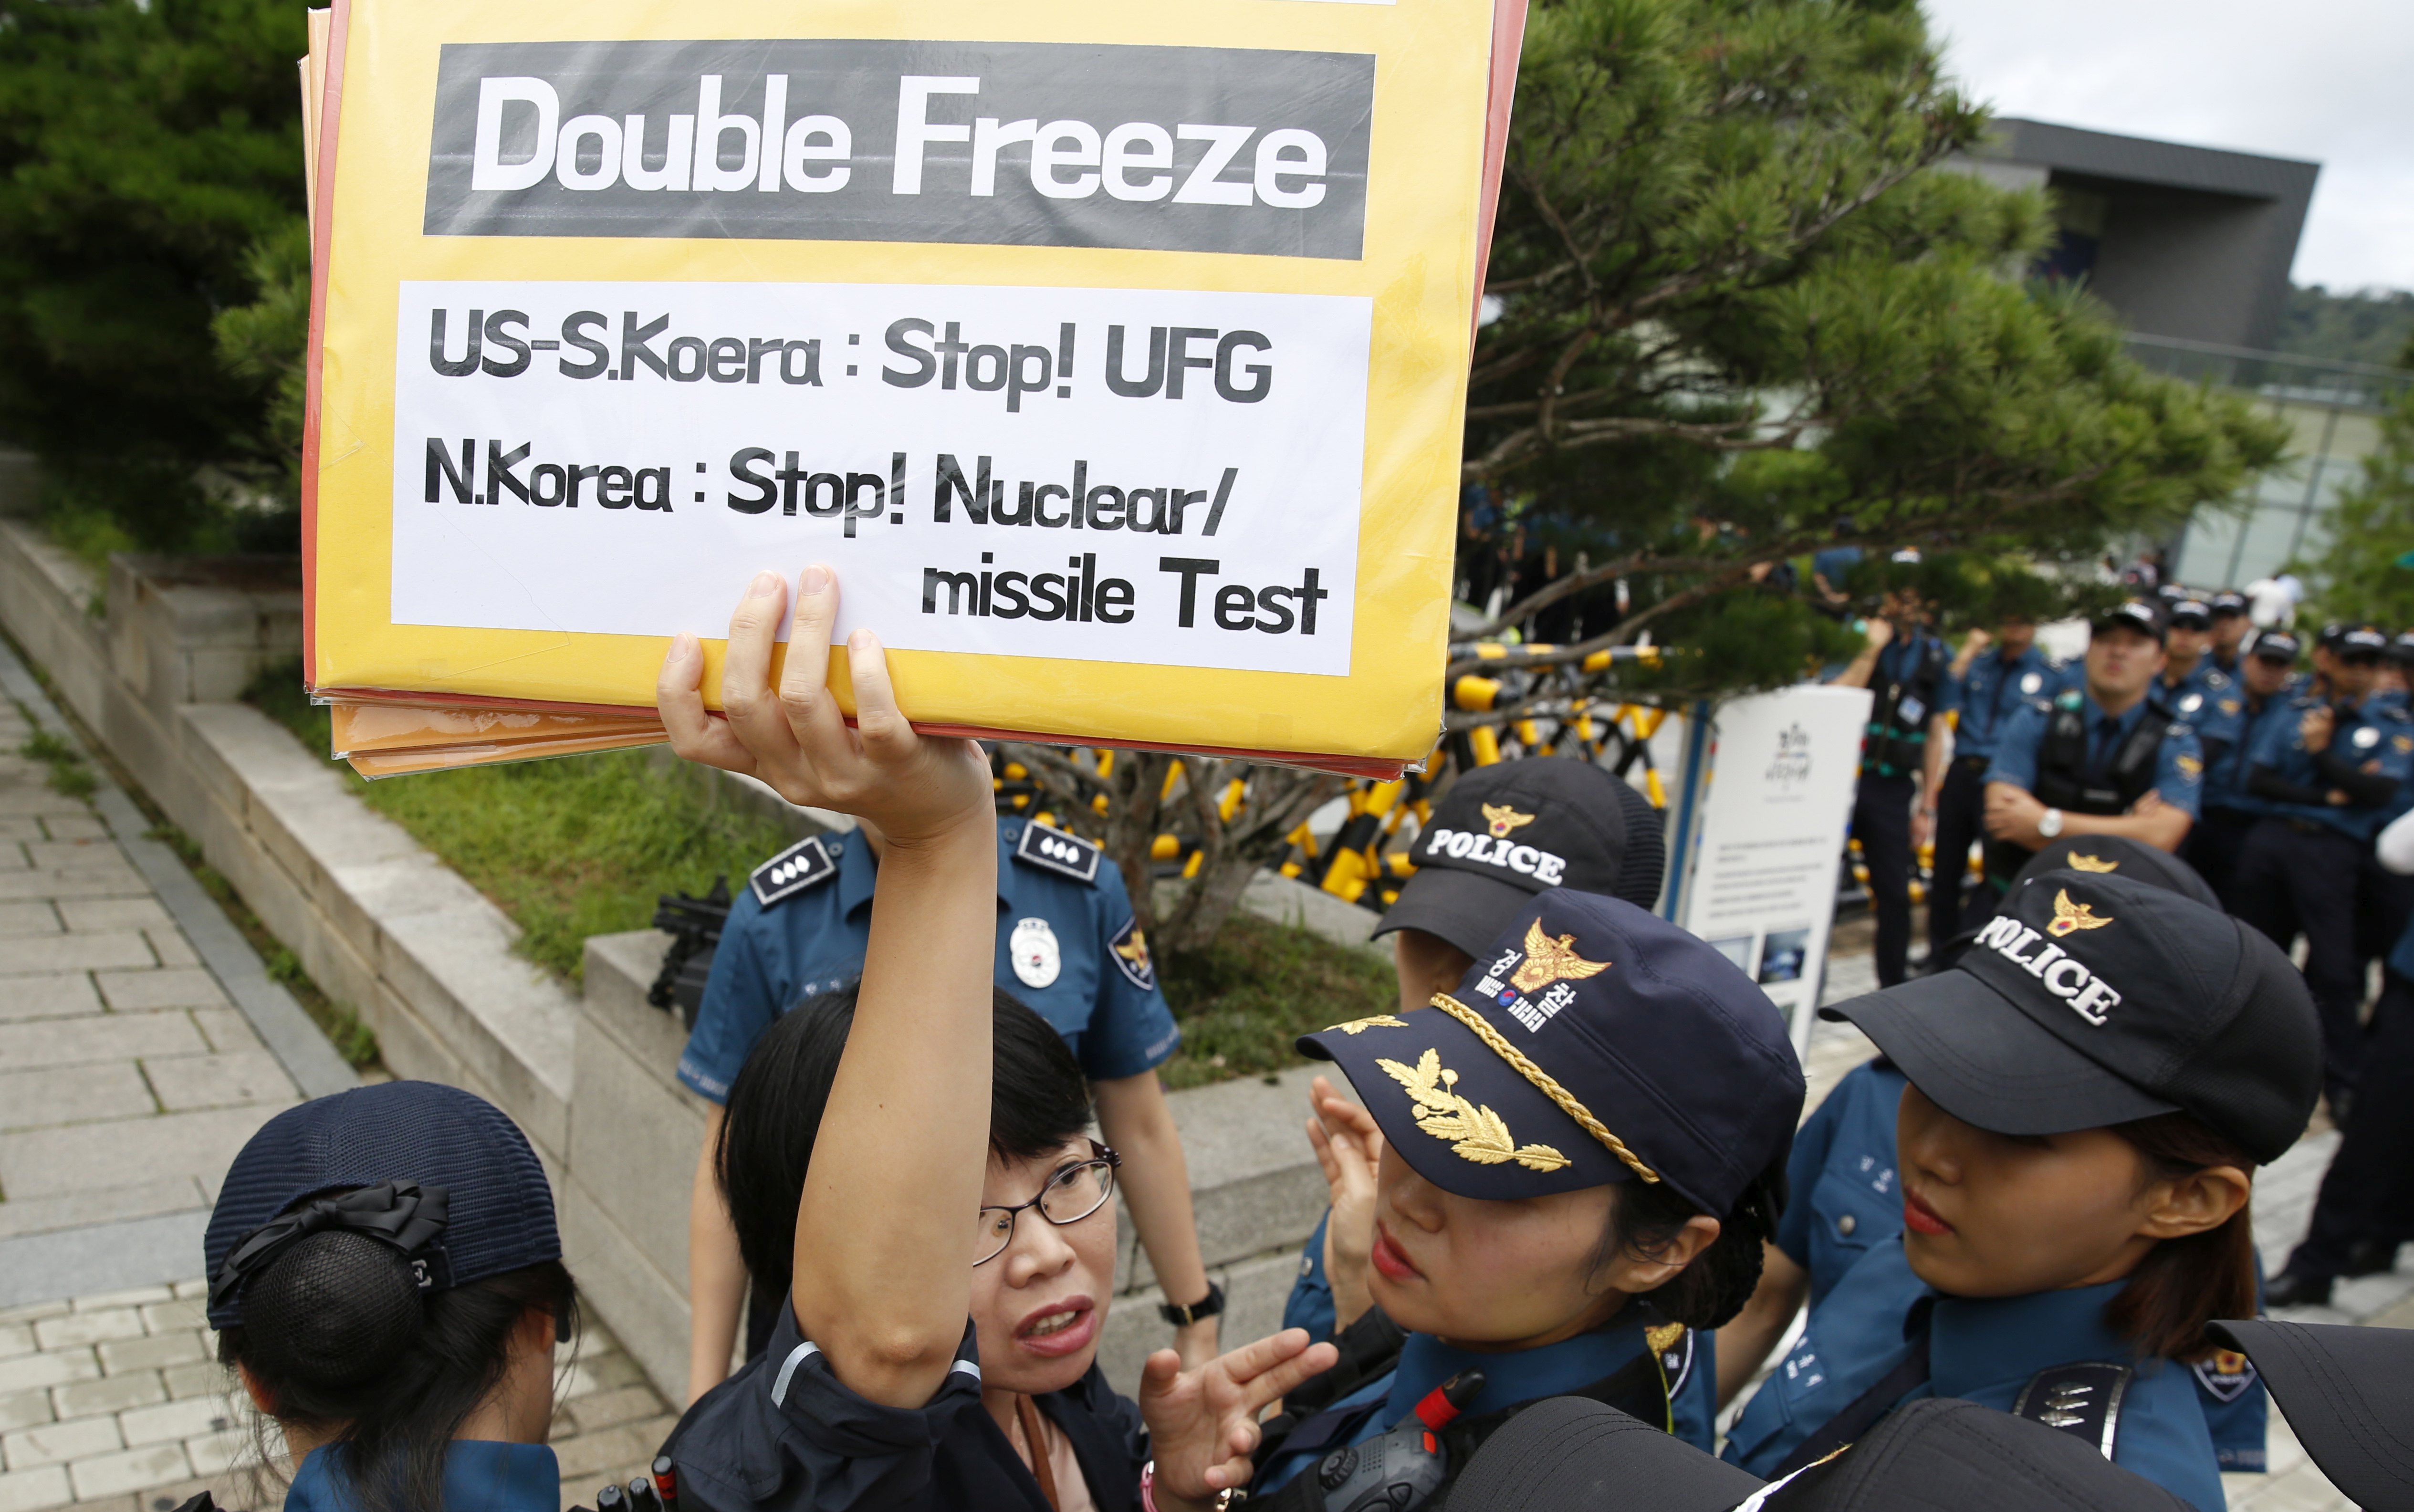 epa06154083 A South Korean protester shouts slogans and holds a placards as policemen surround her during a demonstration against South Korean and US military forces joint 'Ulchi Freedom Guardian (UFG)' exercises, near the Presidential House in Seoul, South Korea, 21 August 2017. The South Korean and US military forces joint exercise is held from 21 to 31 August, to prepare for possible North Korean attacks.  EPA/JEON HEON-KYUN